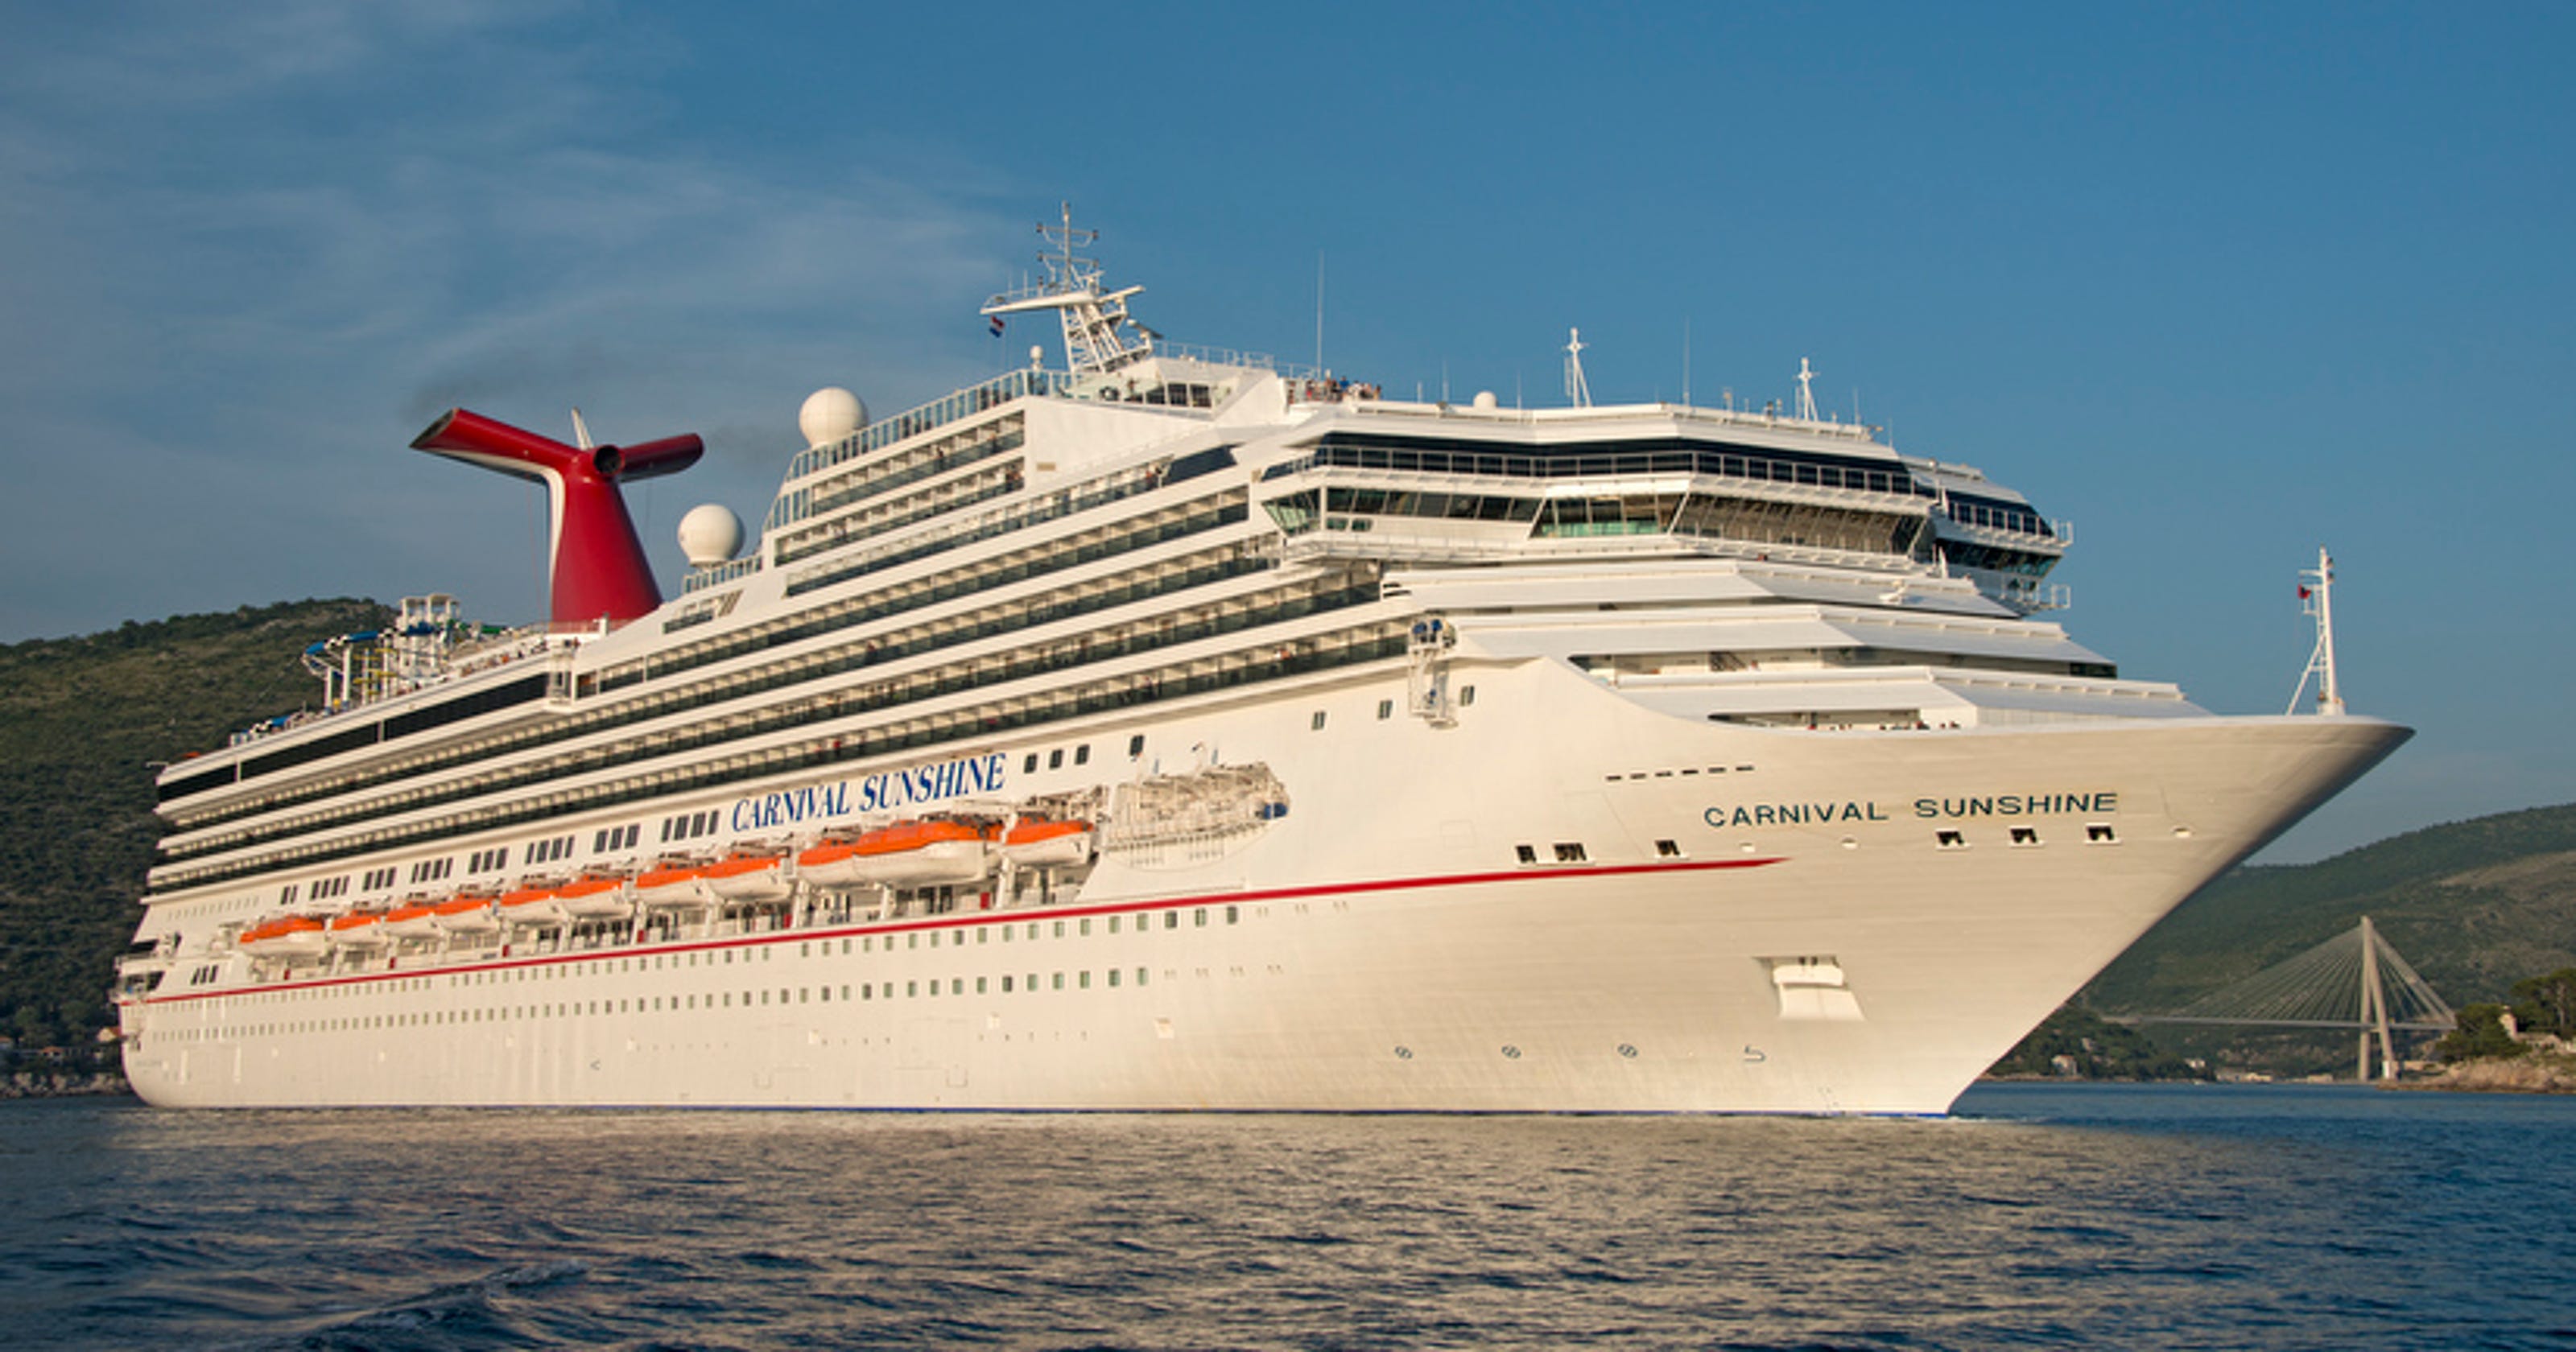 what are the carnival cruise lines